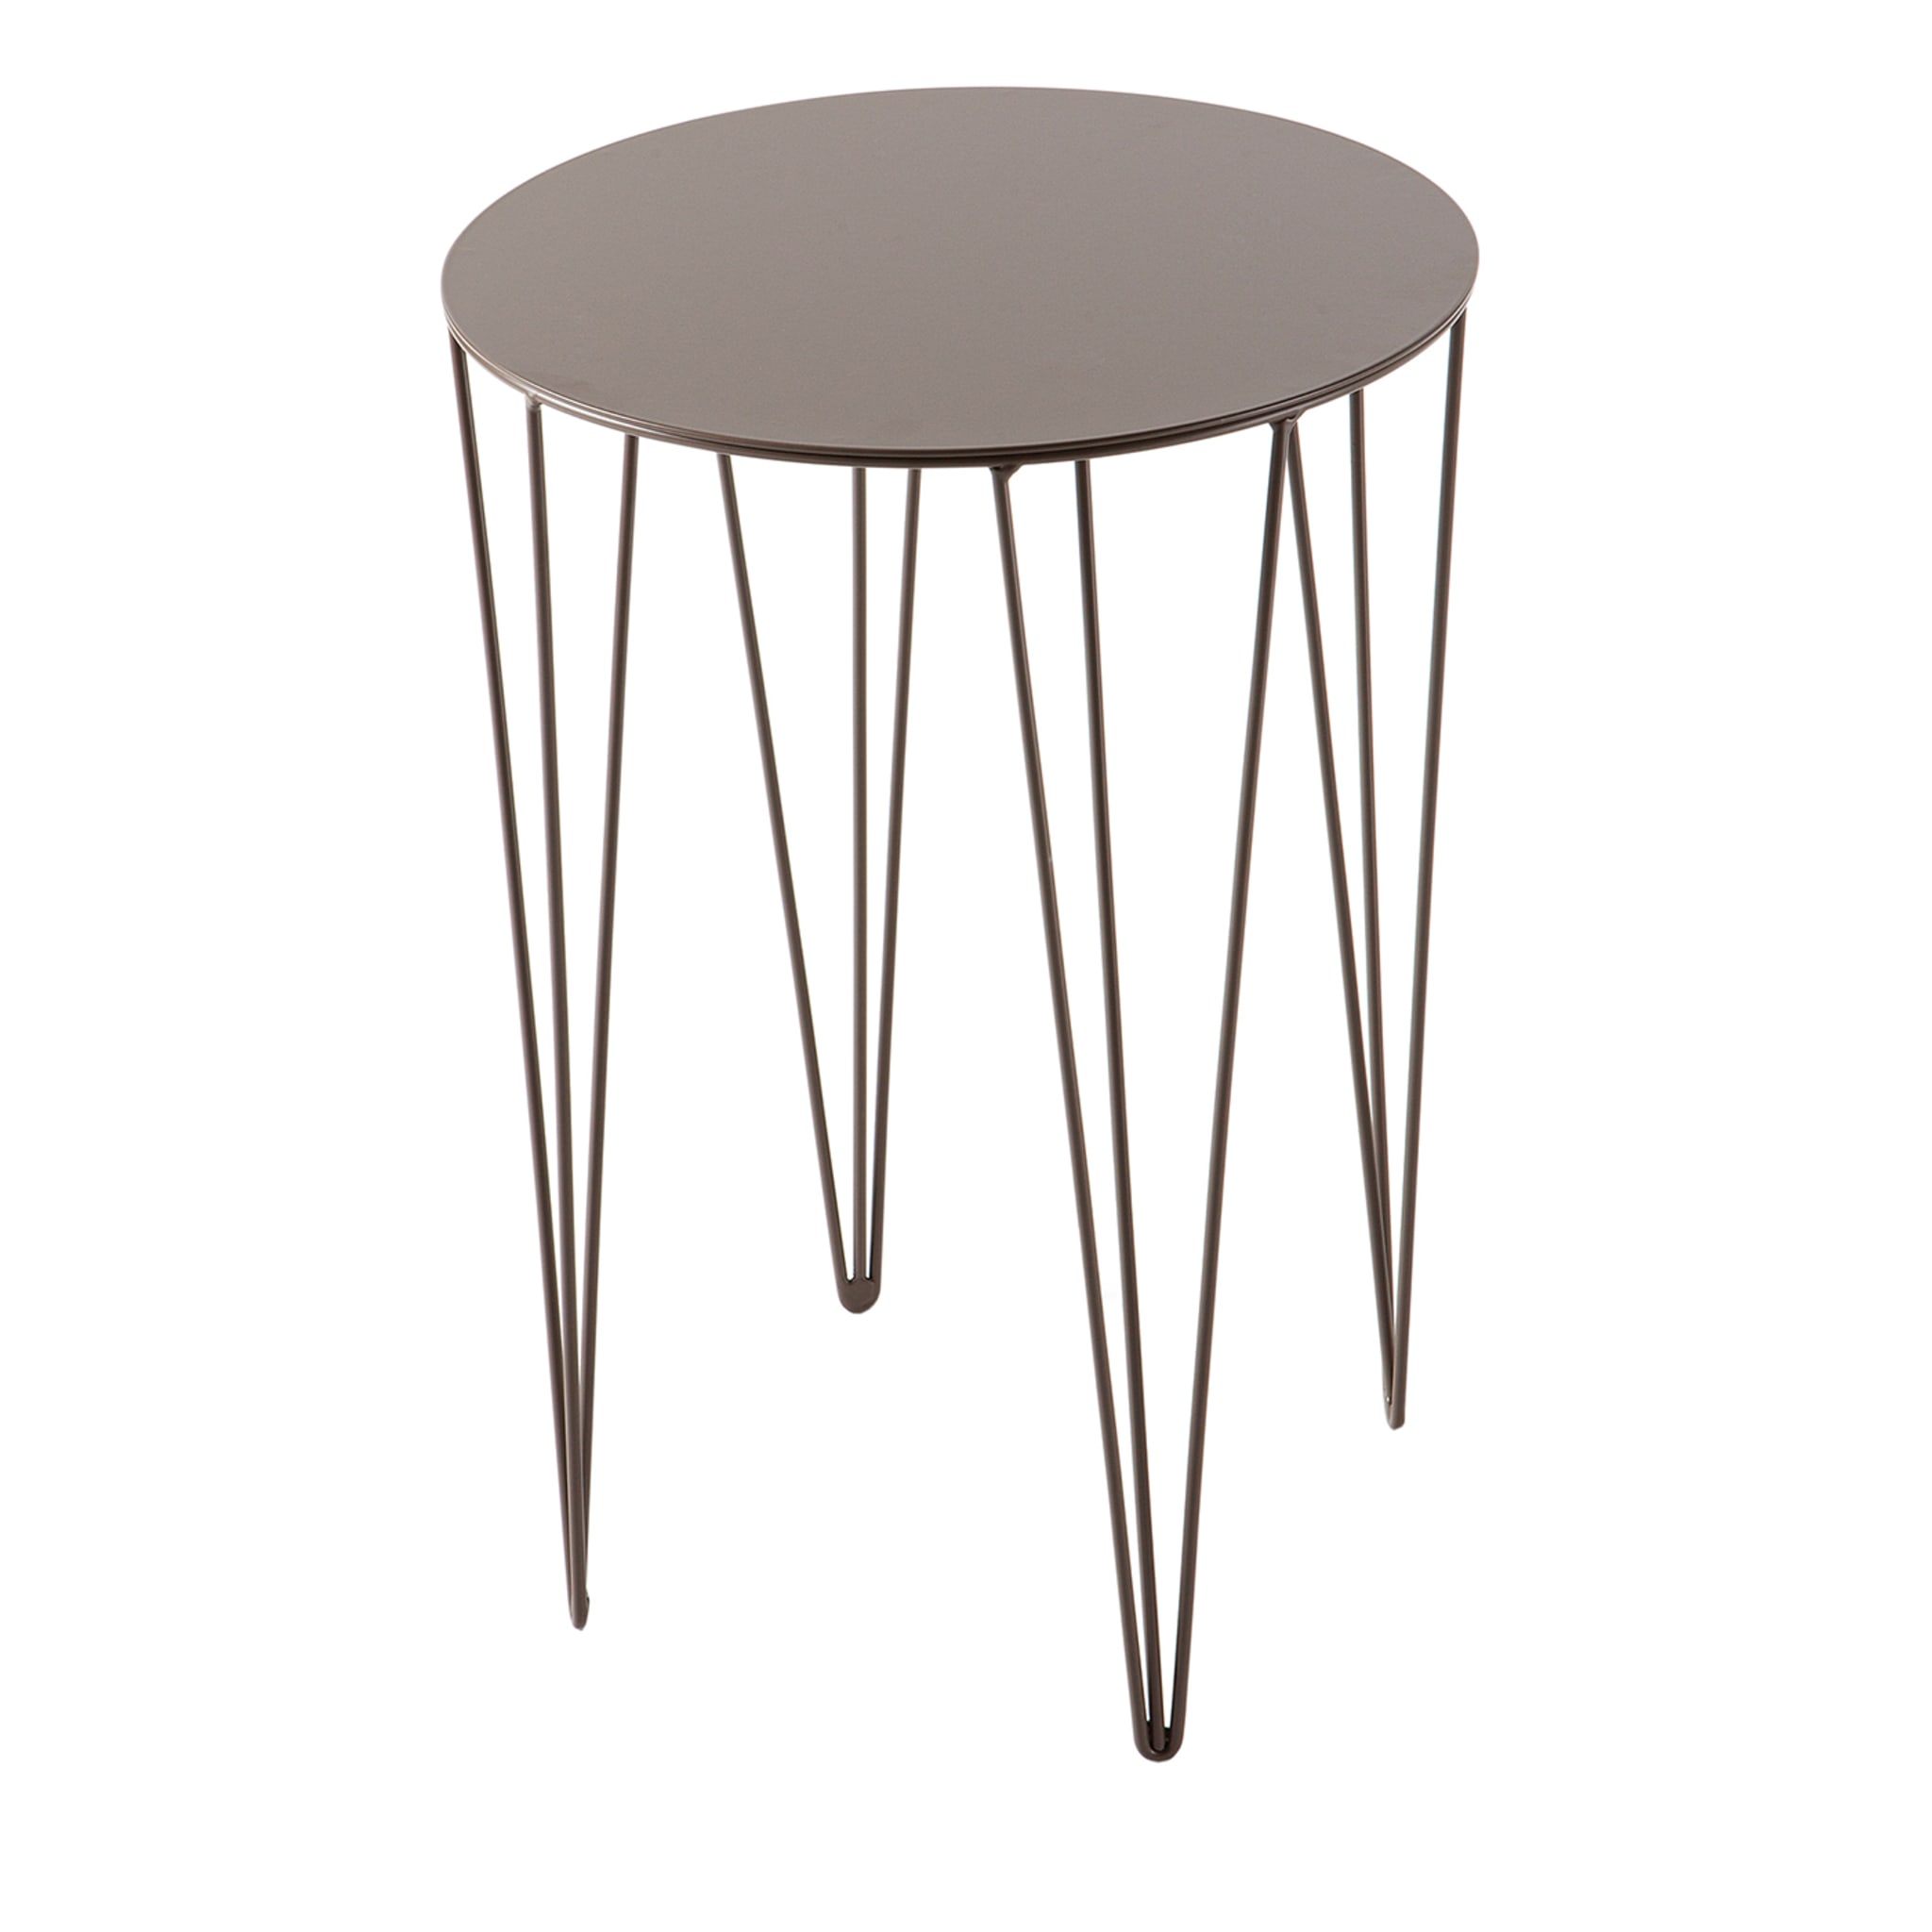 Chele Taupe Table basse ronde #1 - Vue principale